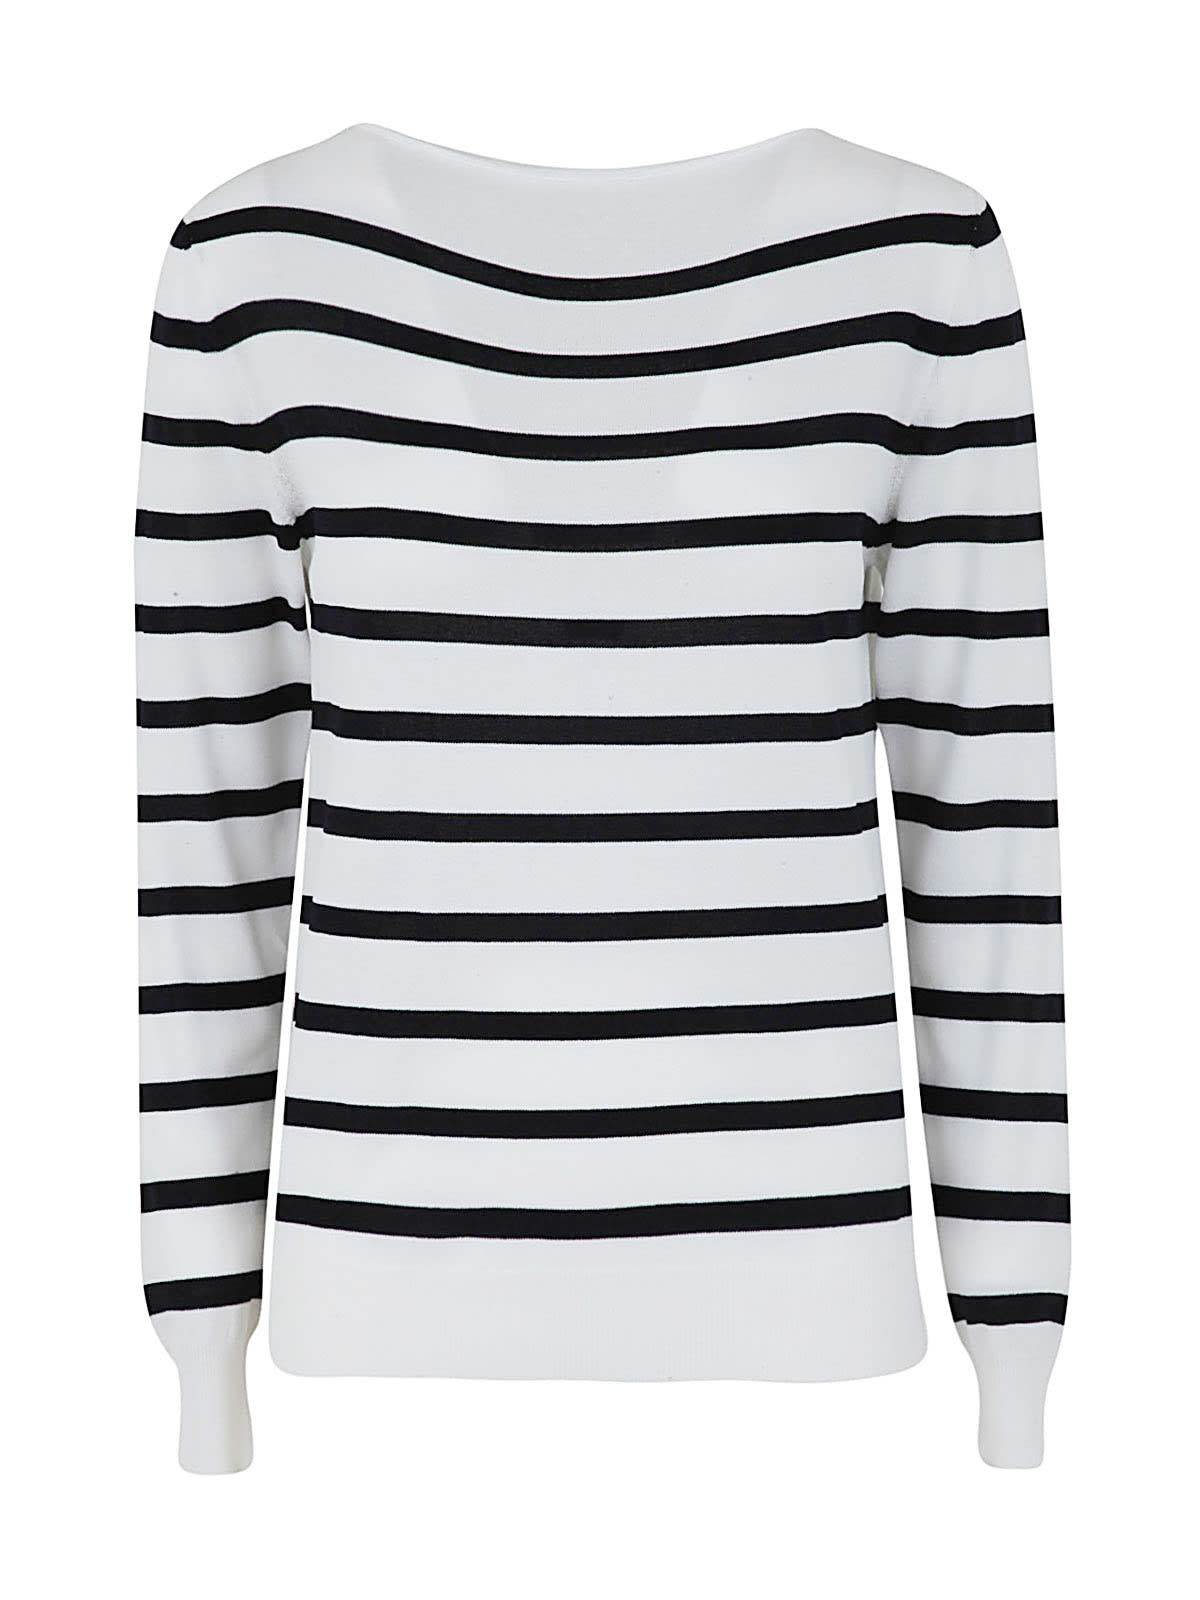 Liviana Conti T-shirt With Medium-lenght Sleeves And Stripes